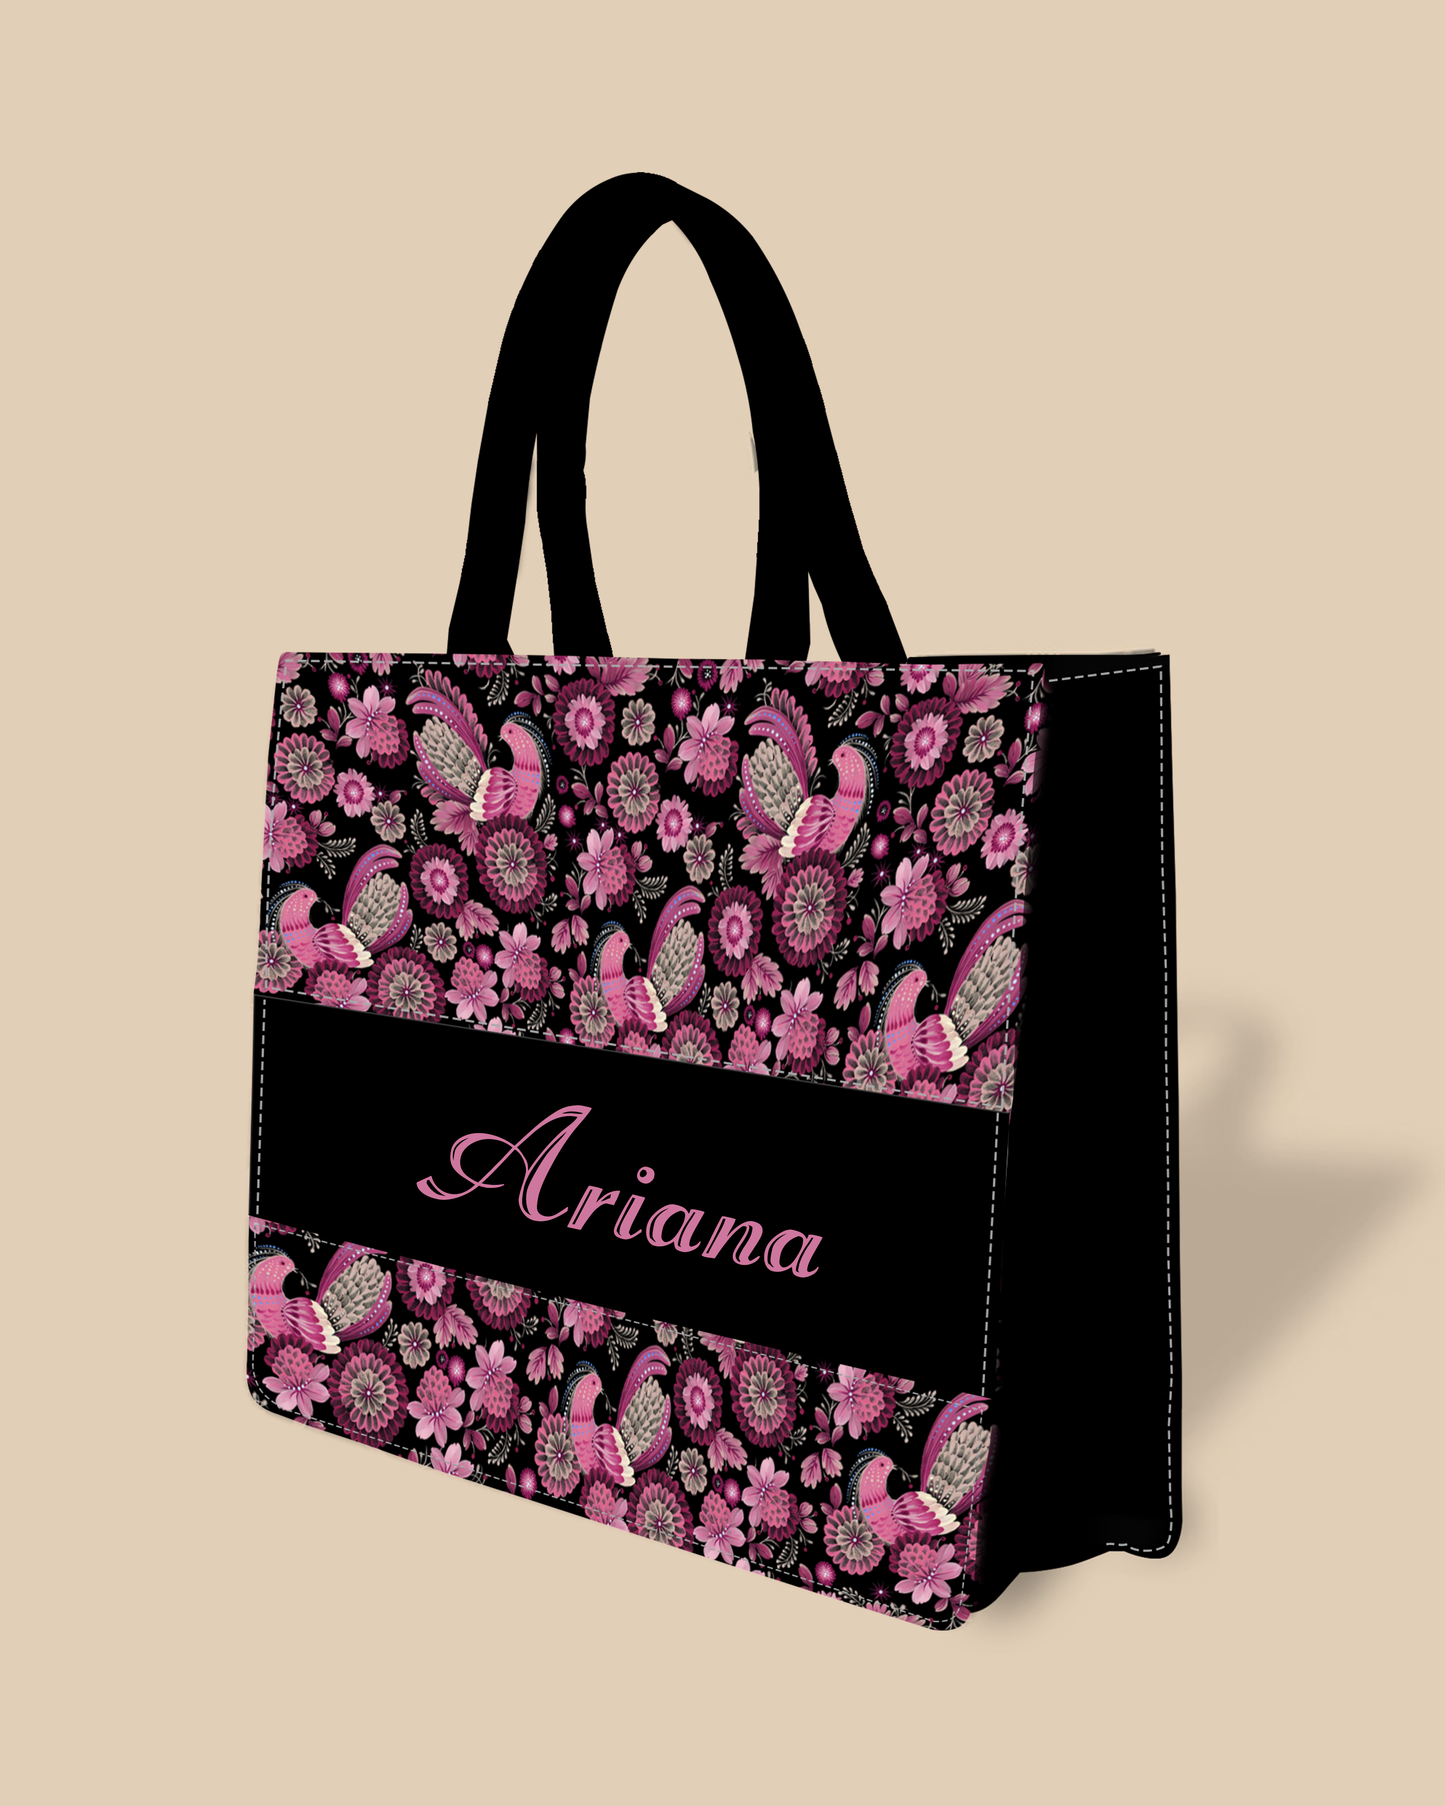 Personalized Tote Bag Designed With Calligraphic Flowers And Peacock Pattern